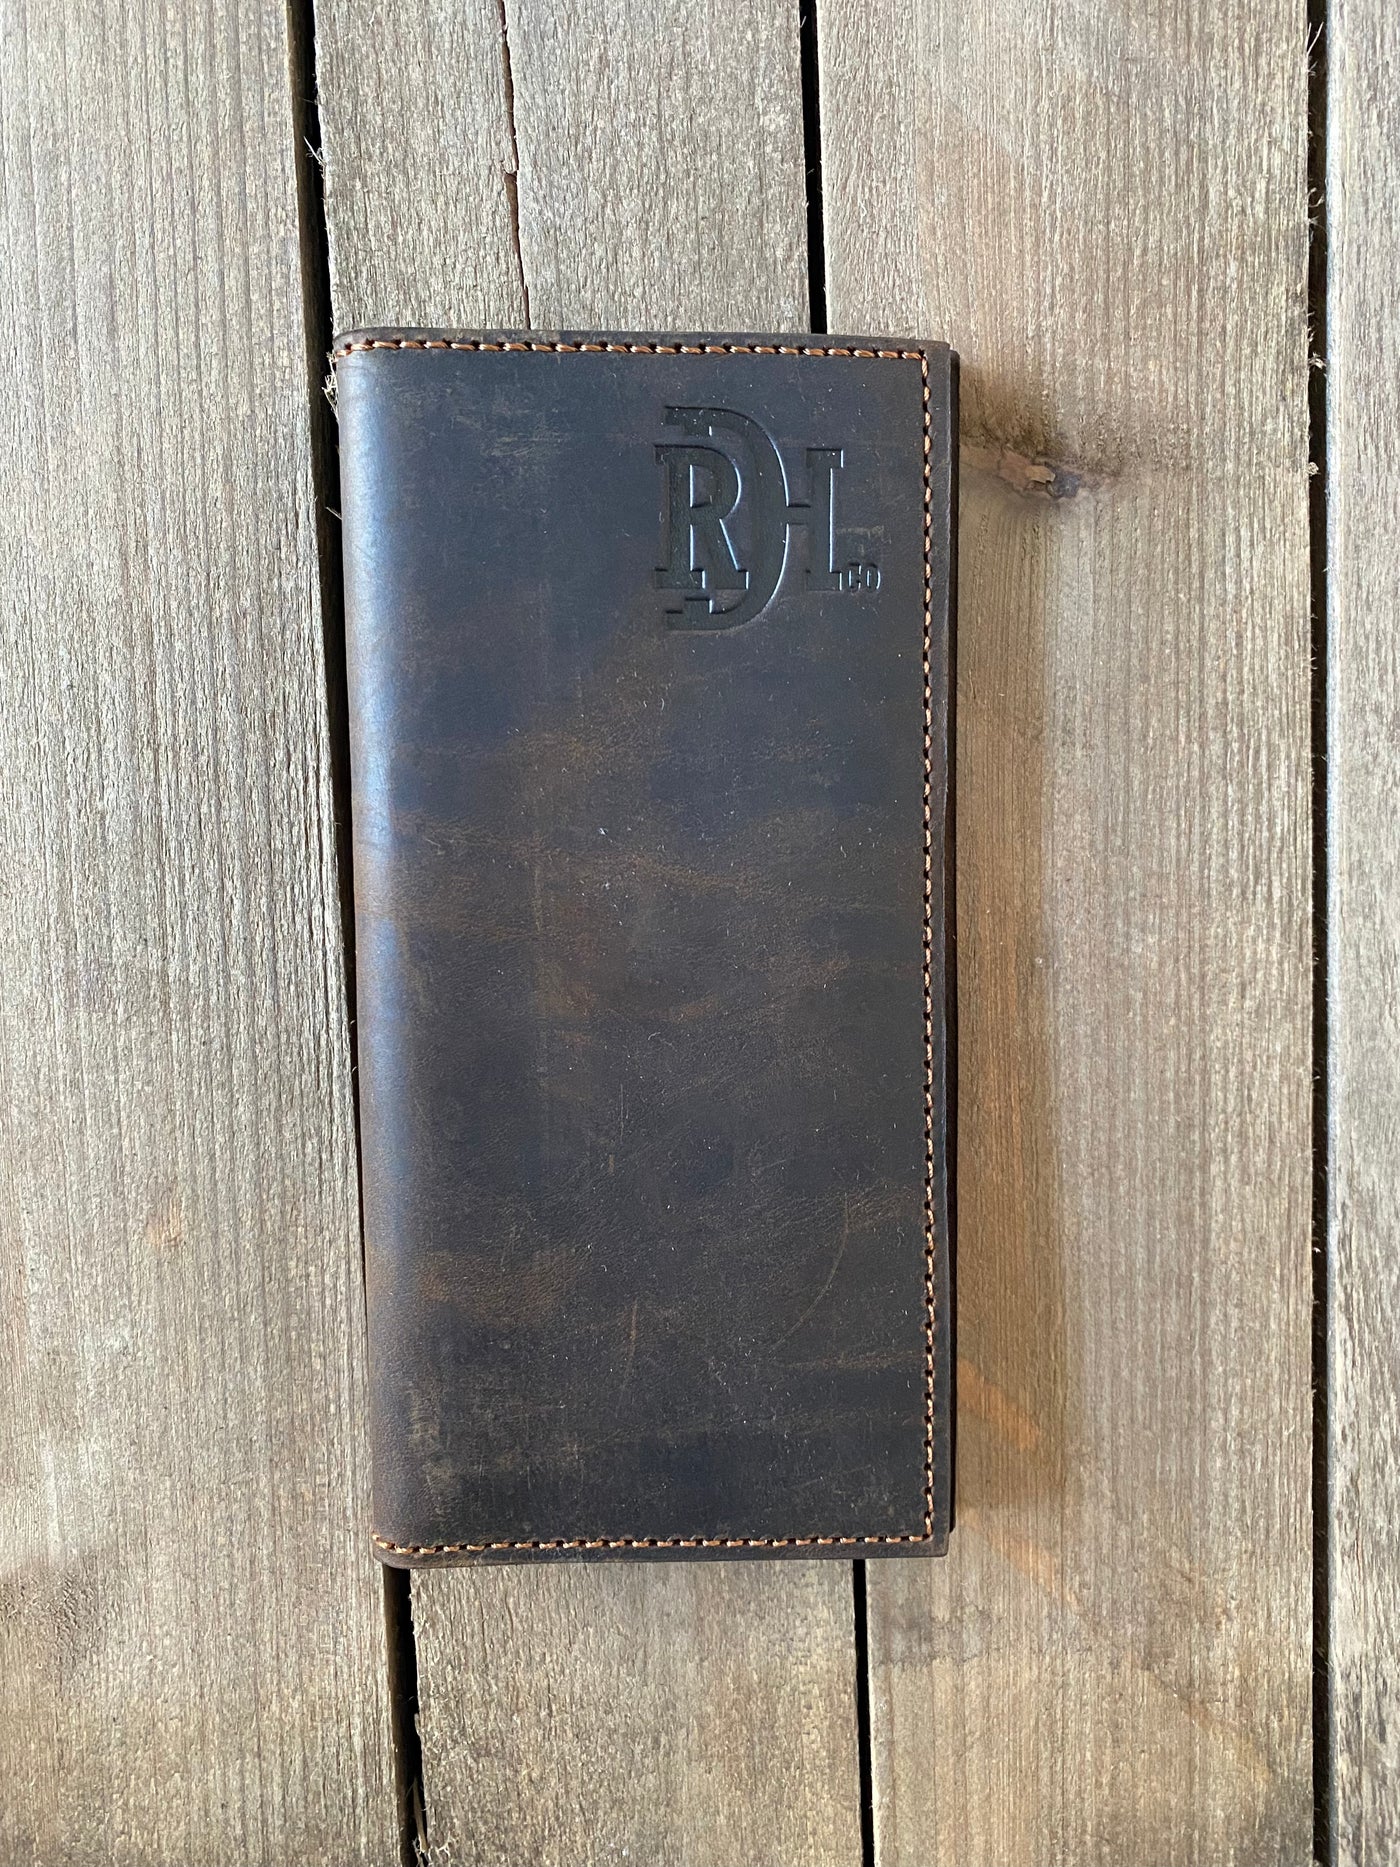 Red Dirt Hat Co Men’s Rodeo Wallet Oiled Finished